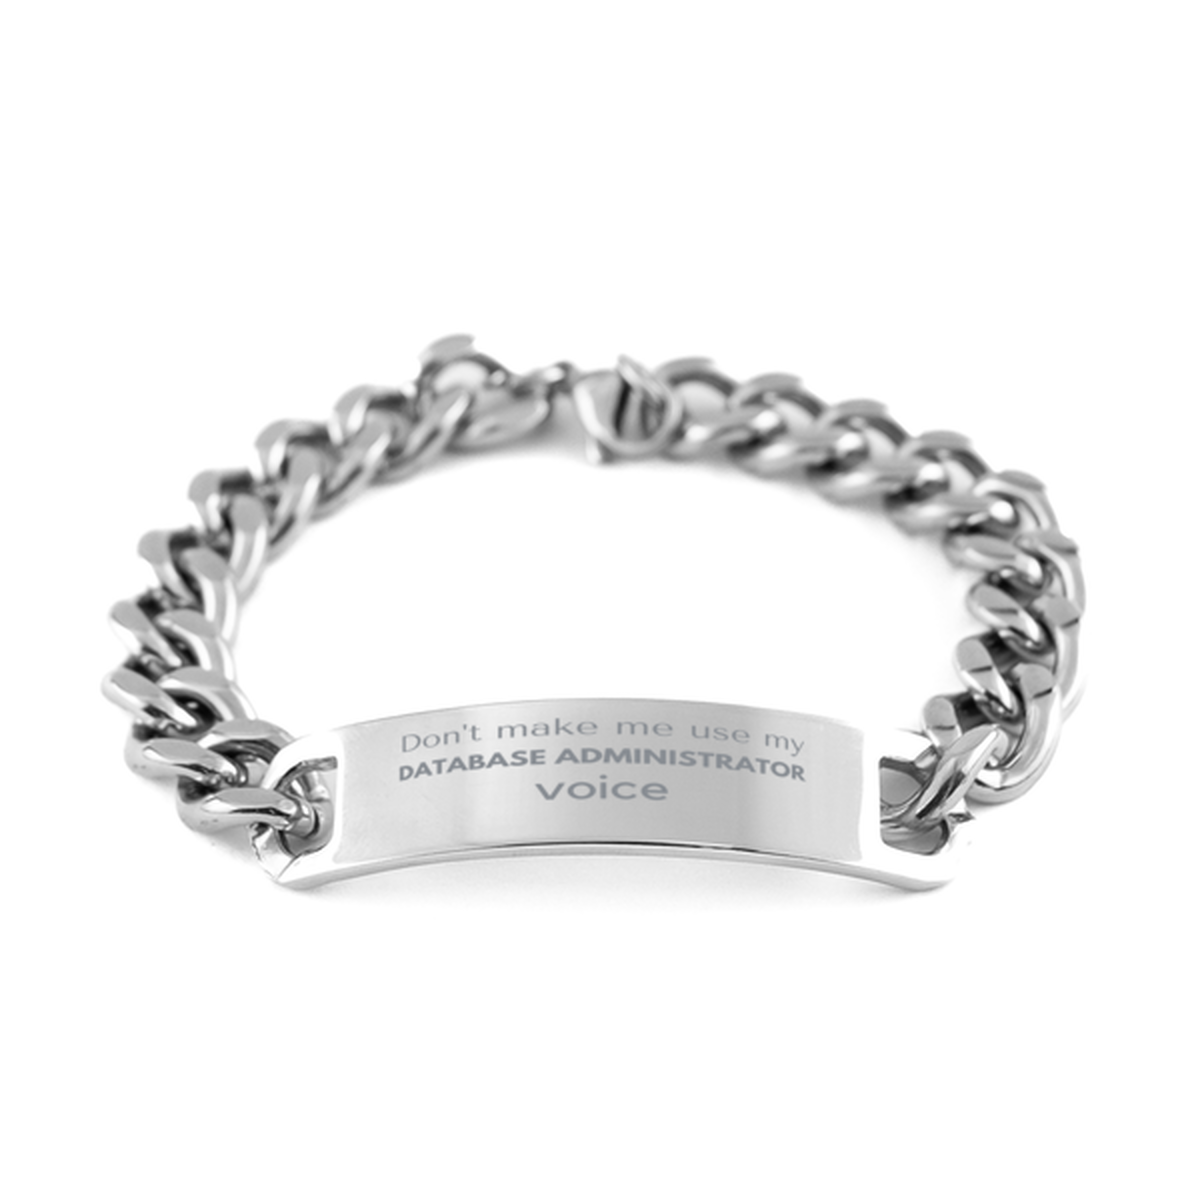 Don't make me use my Database Administrator voice, Sarcasm Database Administrator Gifts, Christmas Database Administrator Cuban Chain Stainless Steel Bracelet Birthday Unique Gifts For Database Administrator Coworkers, Men, Women, Colleague, Friends